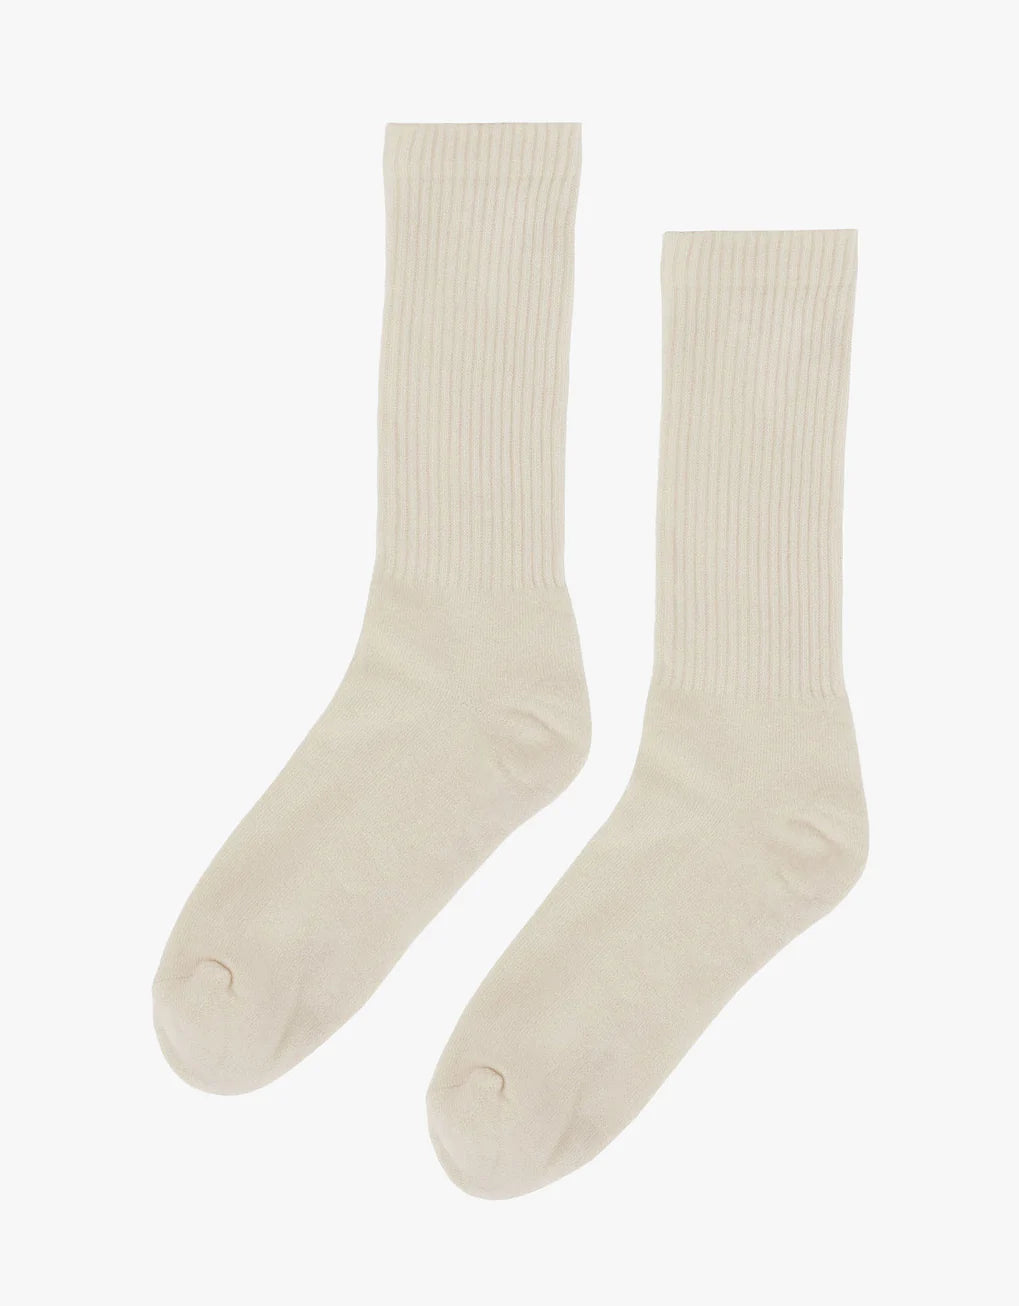 A pair of Colorful Standard Organic Active Socks on a white background.